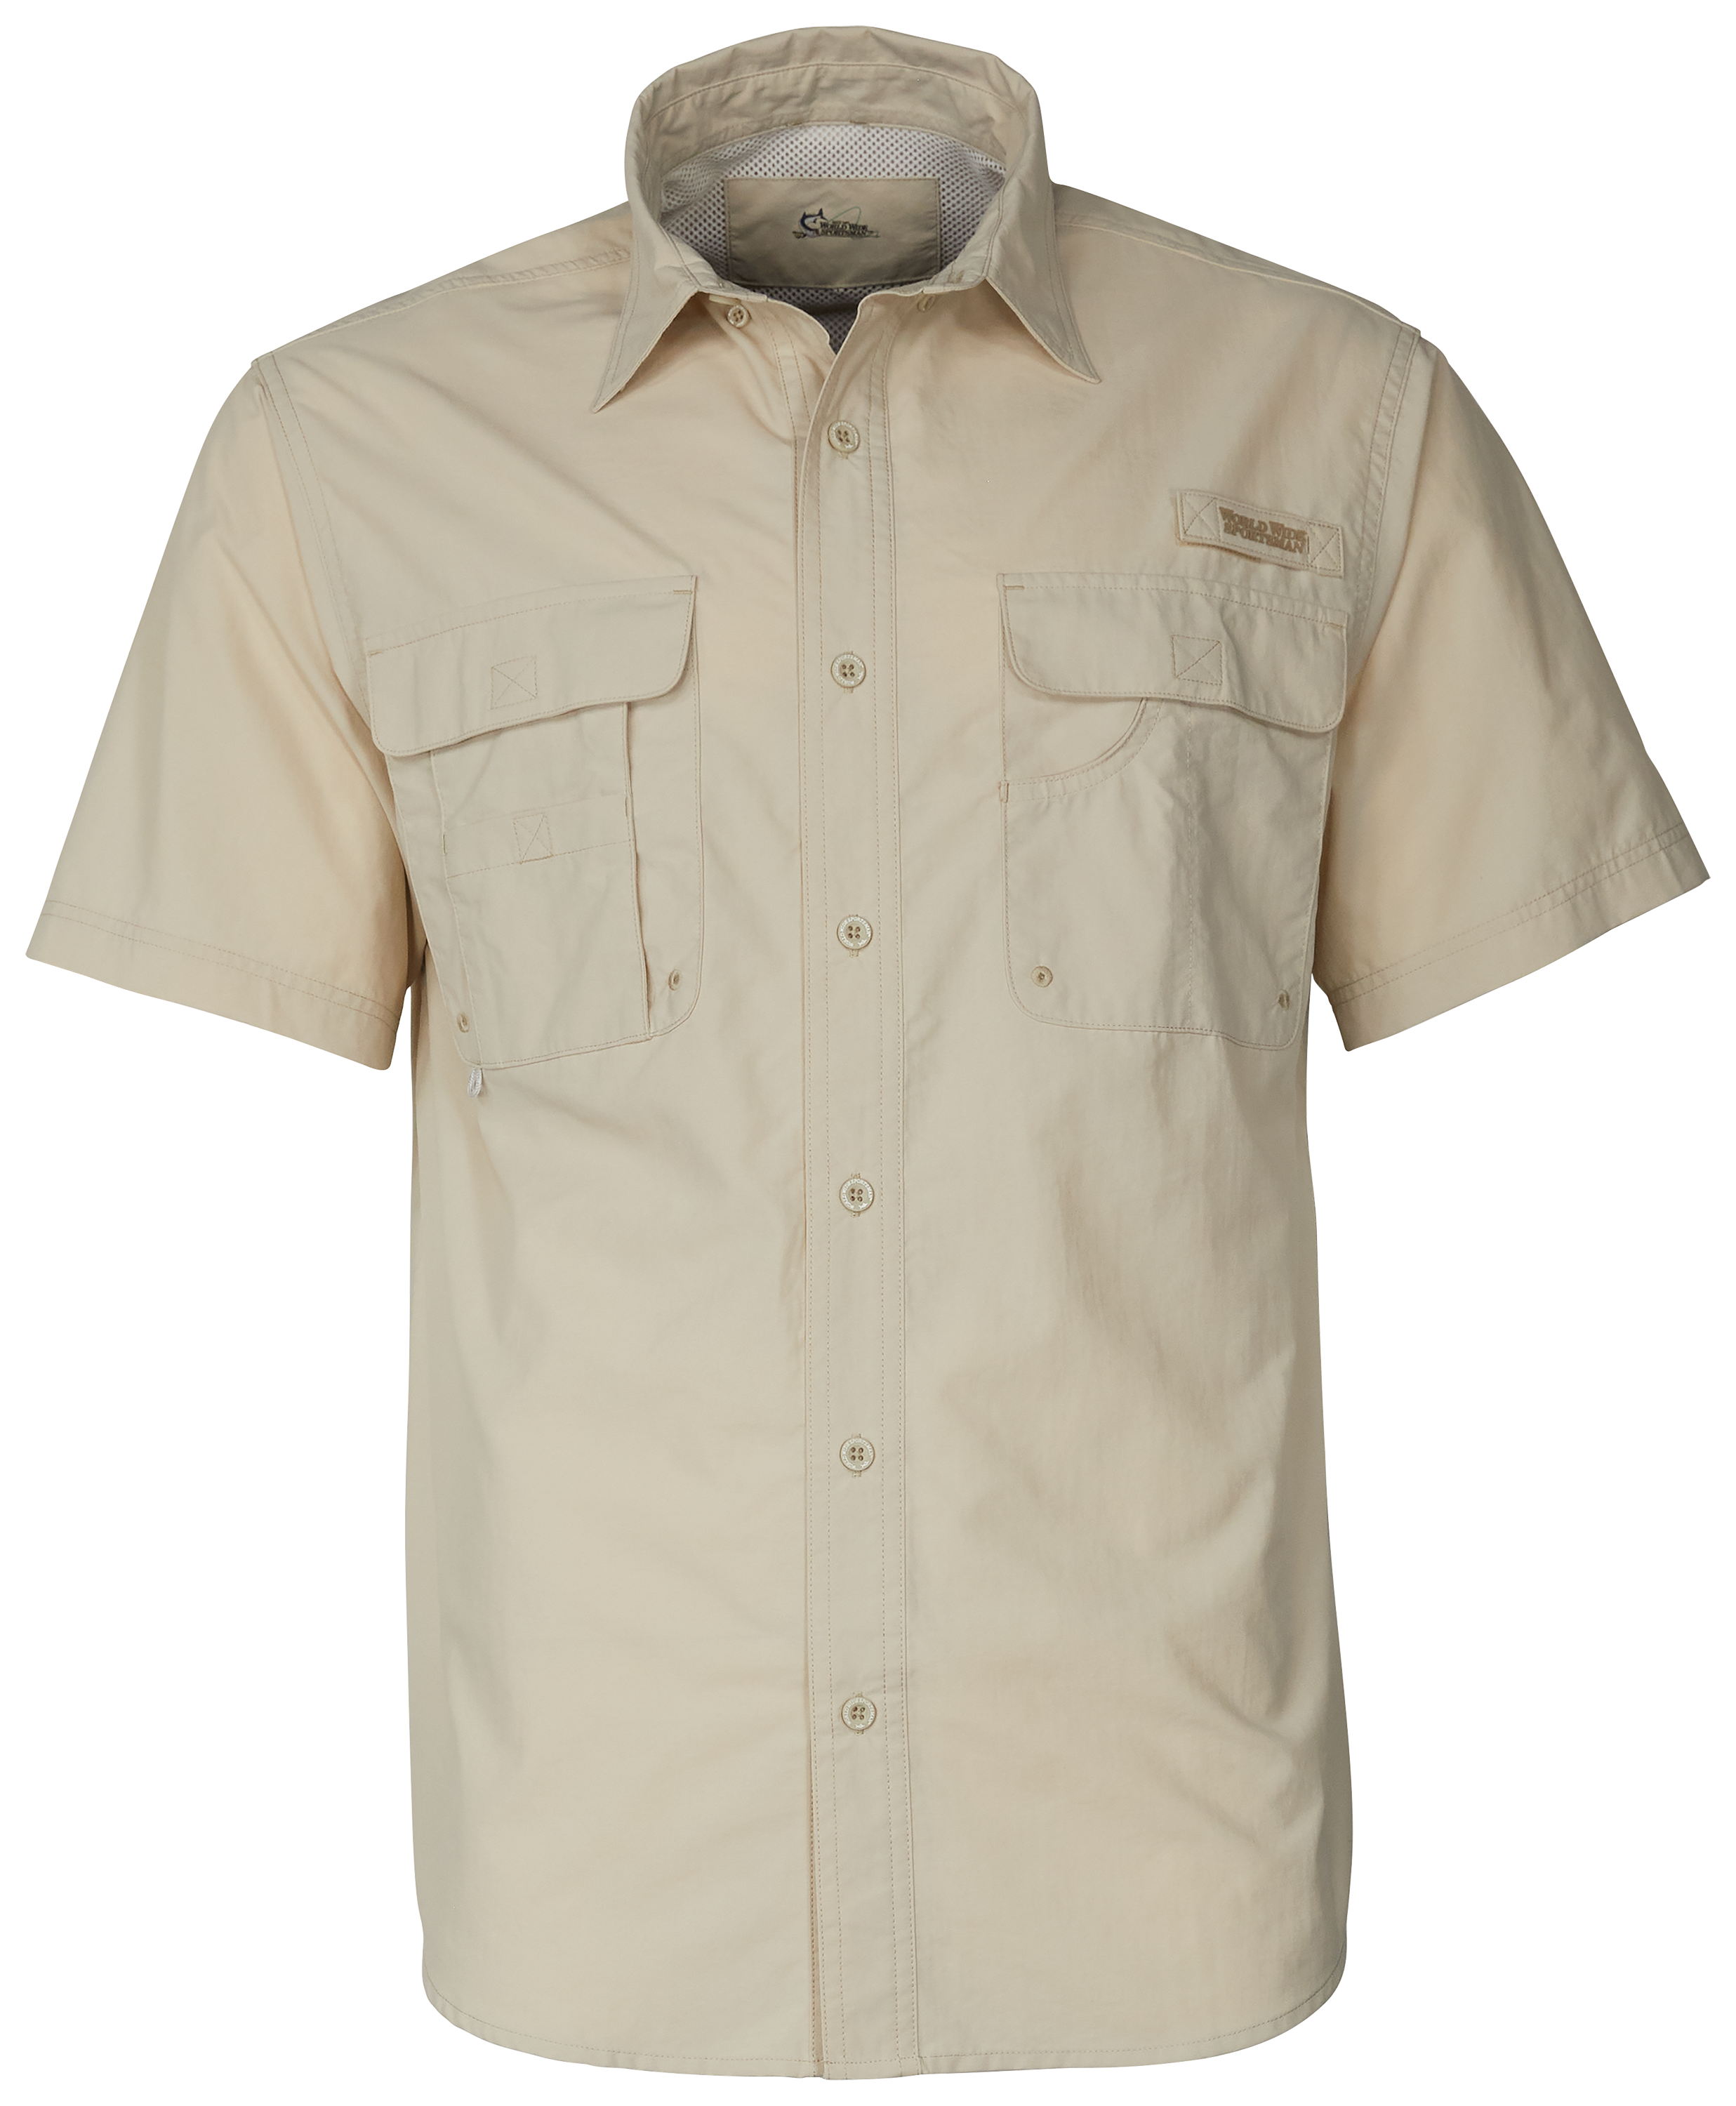 World Wide Sportsman Recycled-Nylon Angler 2.0 Short-Sleeve Button-Down Shirt for Men - Peyote - L